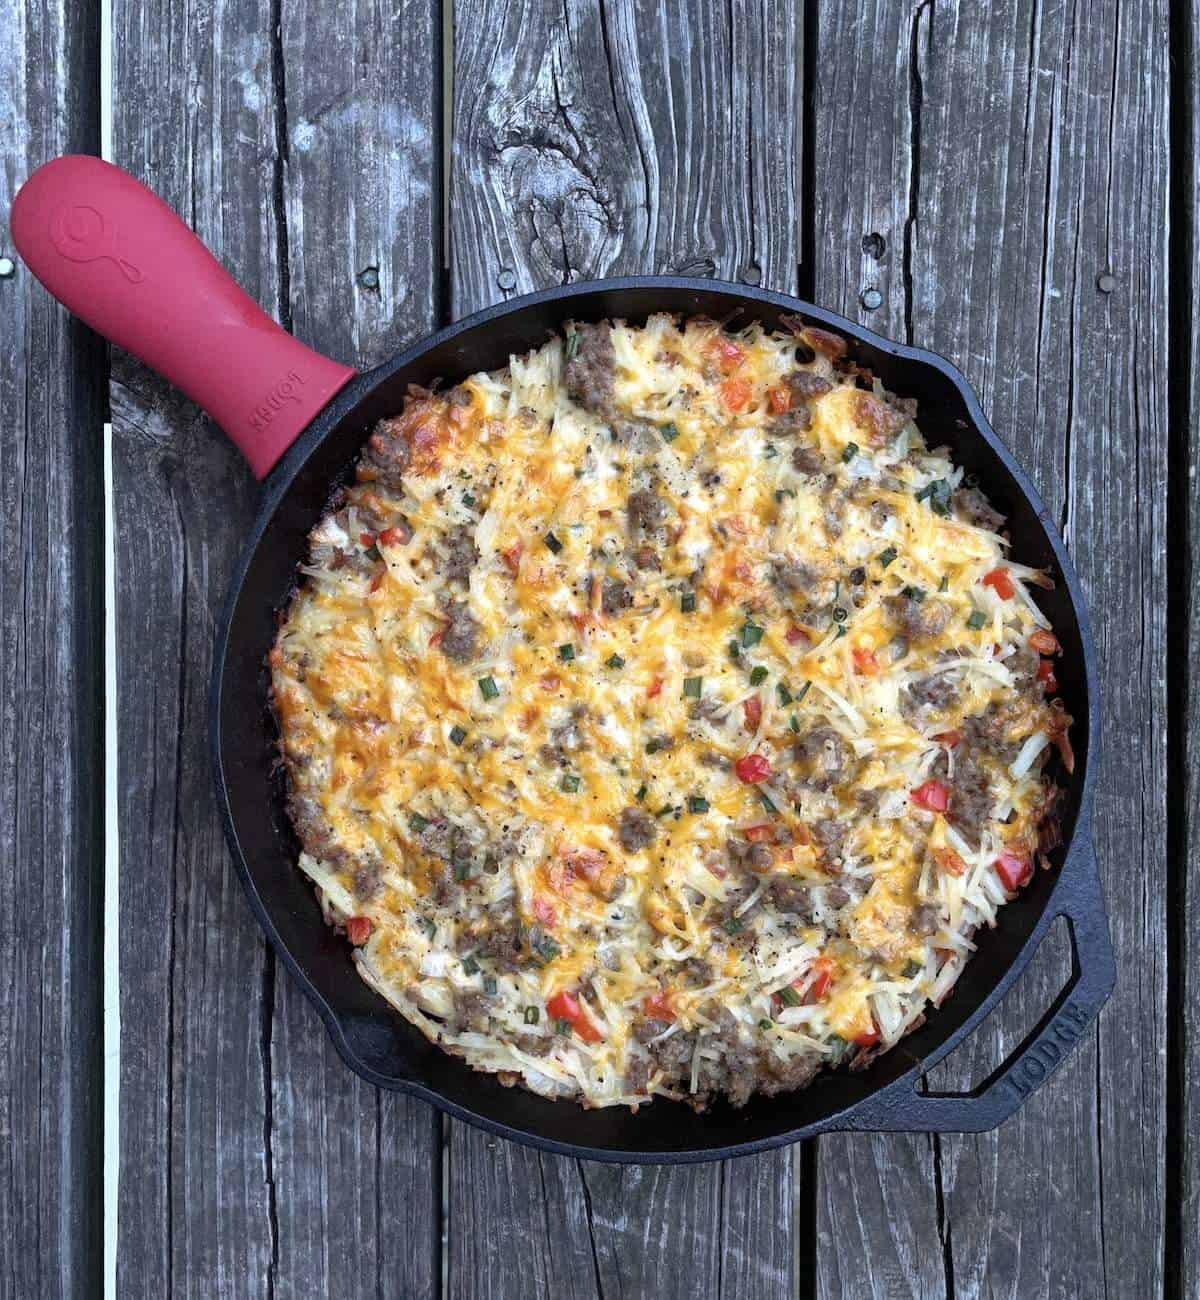 A cast iron pan filled with cheesy hash brown casserole on a wood background.